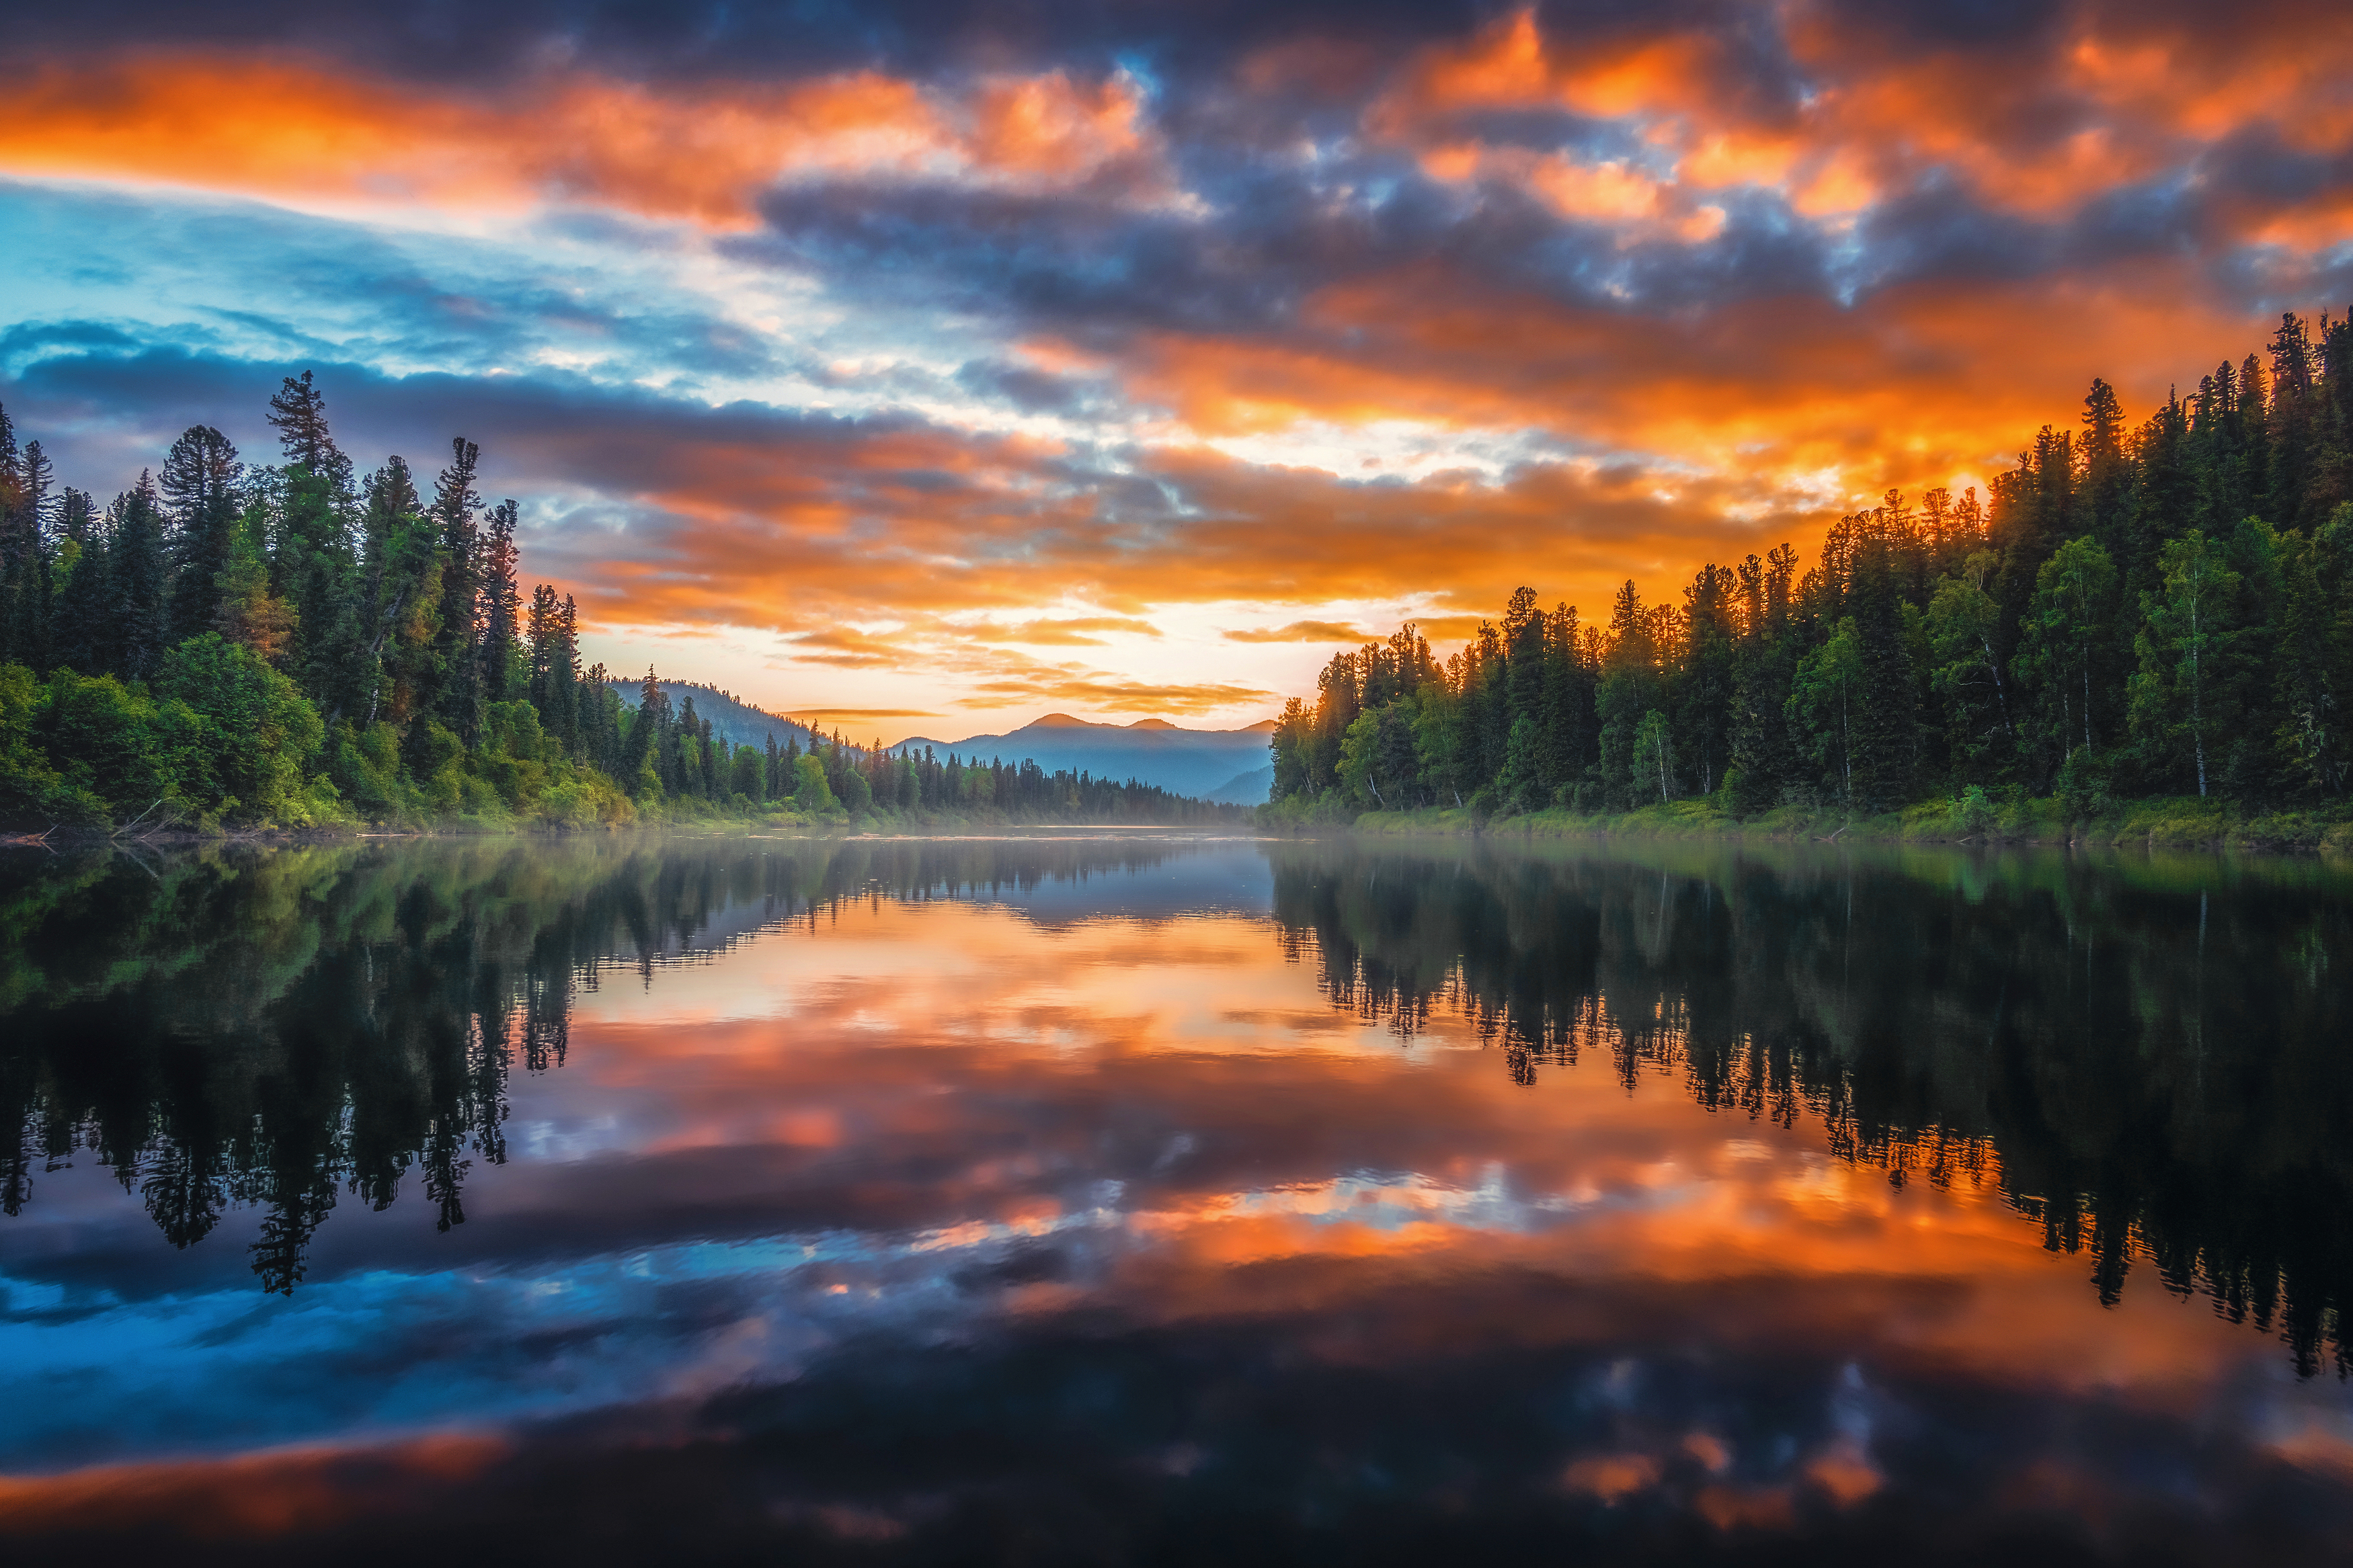 General 3500x2333 Nikitin Alexander water trees nature outdoors sunset reflection clouds